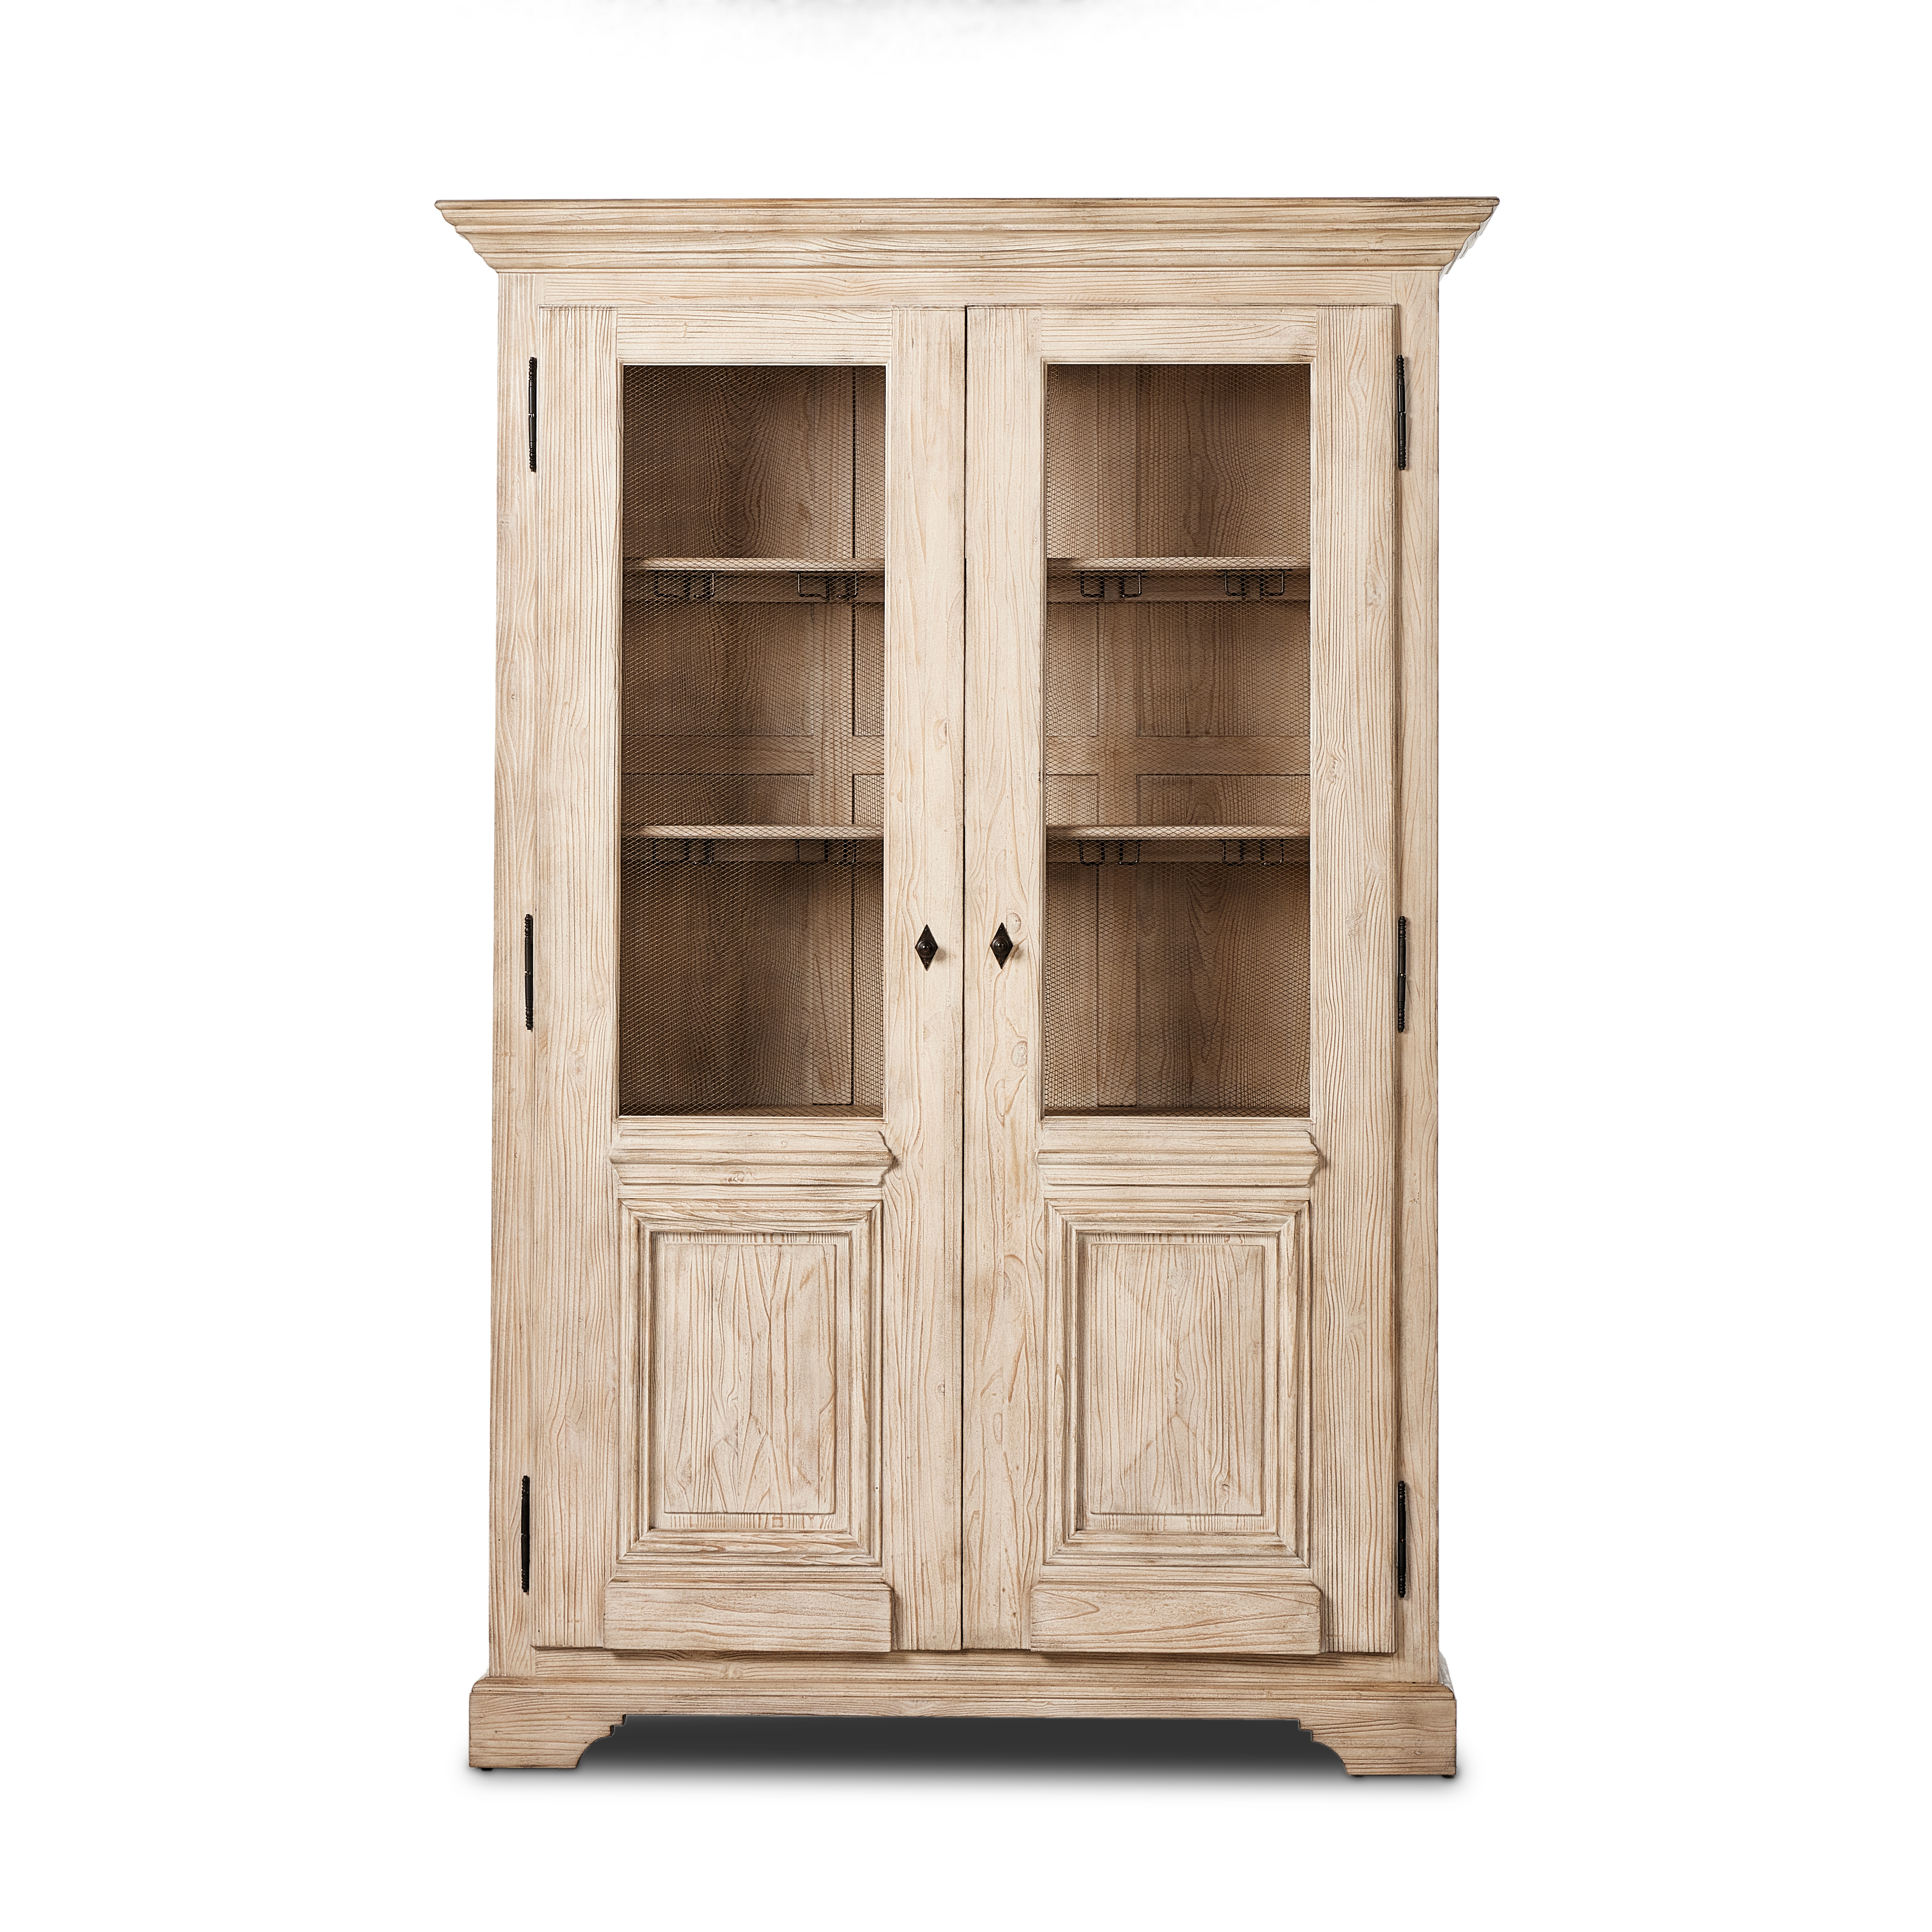 The "please No More Doors" Cabinet-Ntrl - Image 3